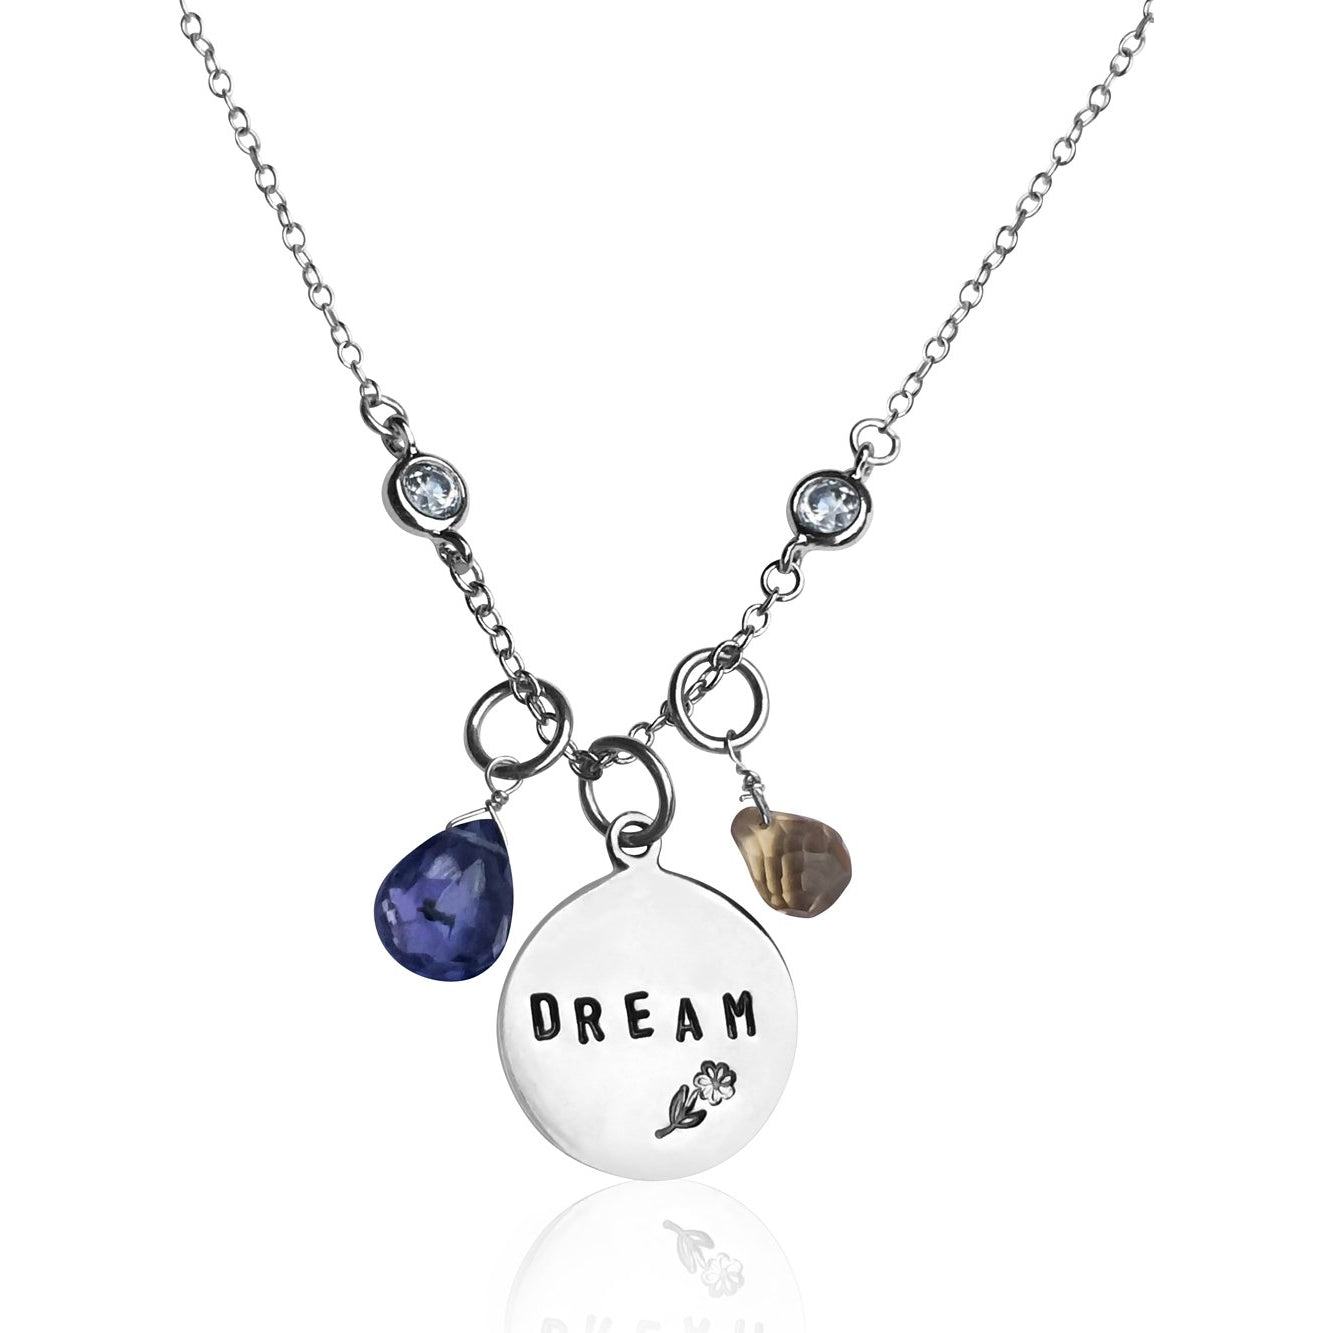 DREAM Inspirational Sterling Silver Necklace with Tanzanite and Citrine